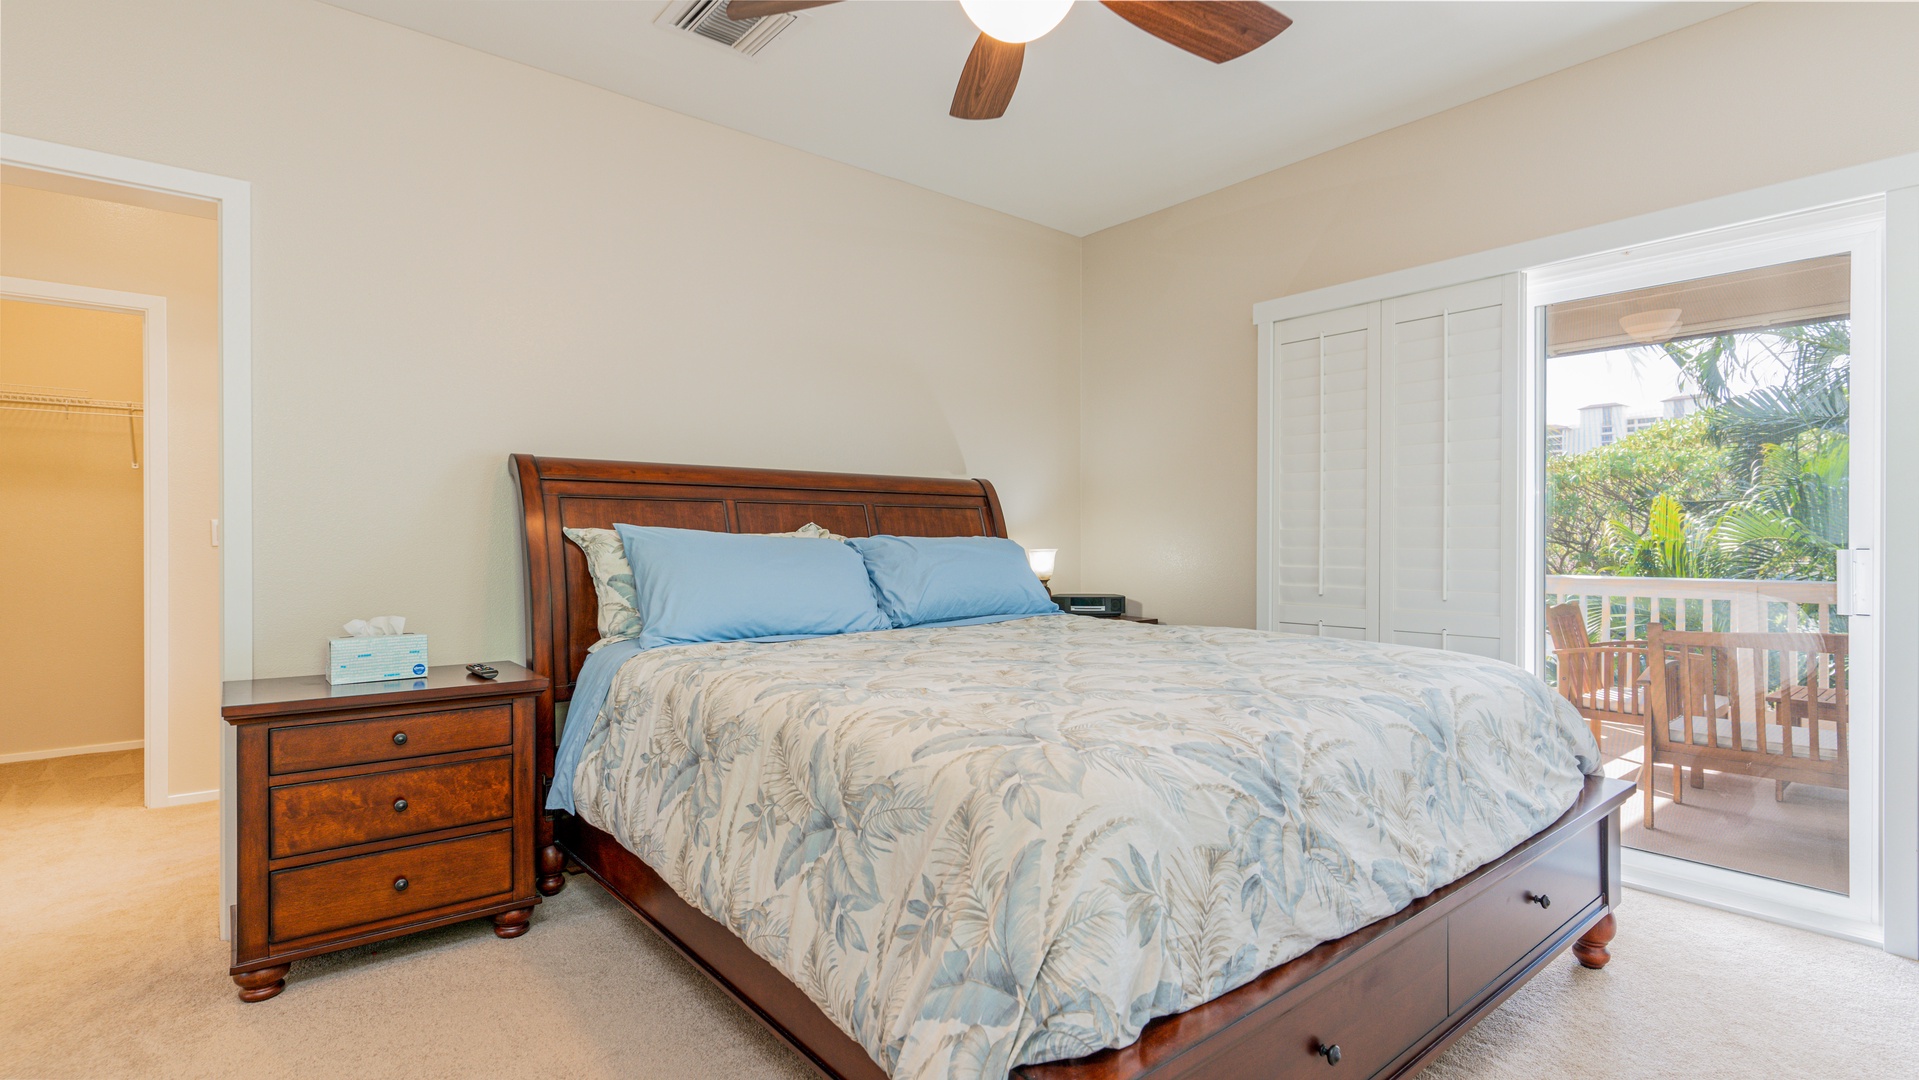 Kapolei Vacation Rentals, Coconut Plantation 1234-2 - The upstairs primary guest bedroom has soft linens and a ceiling fan.